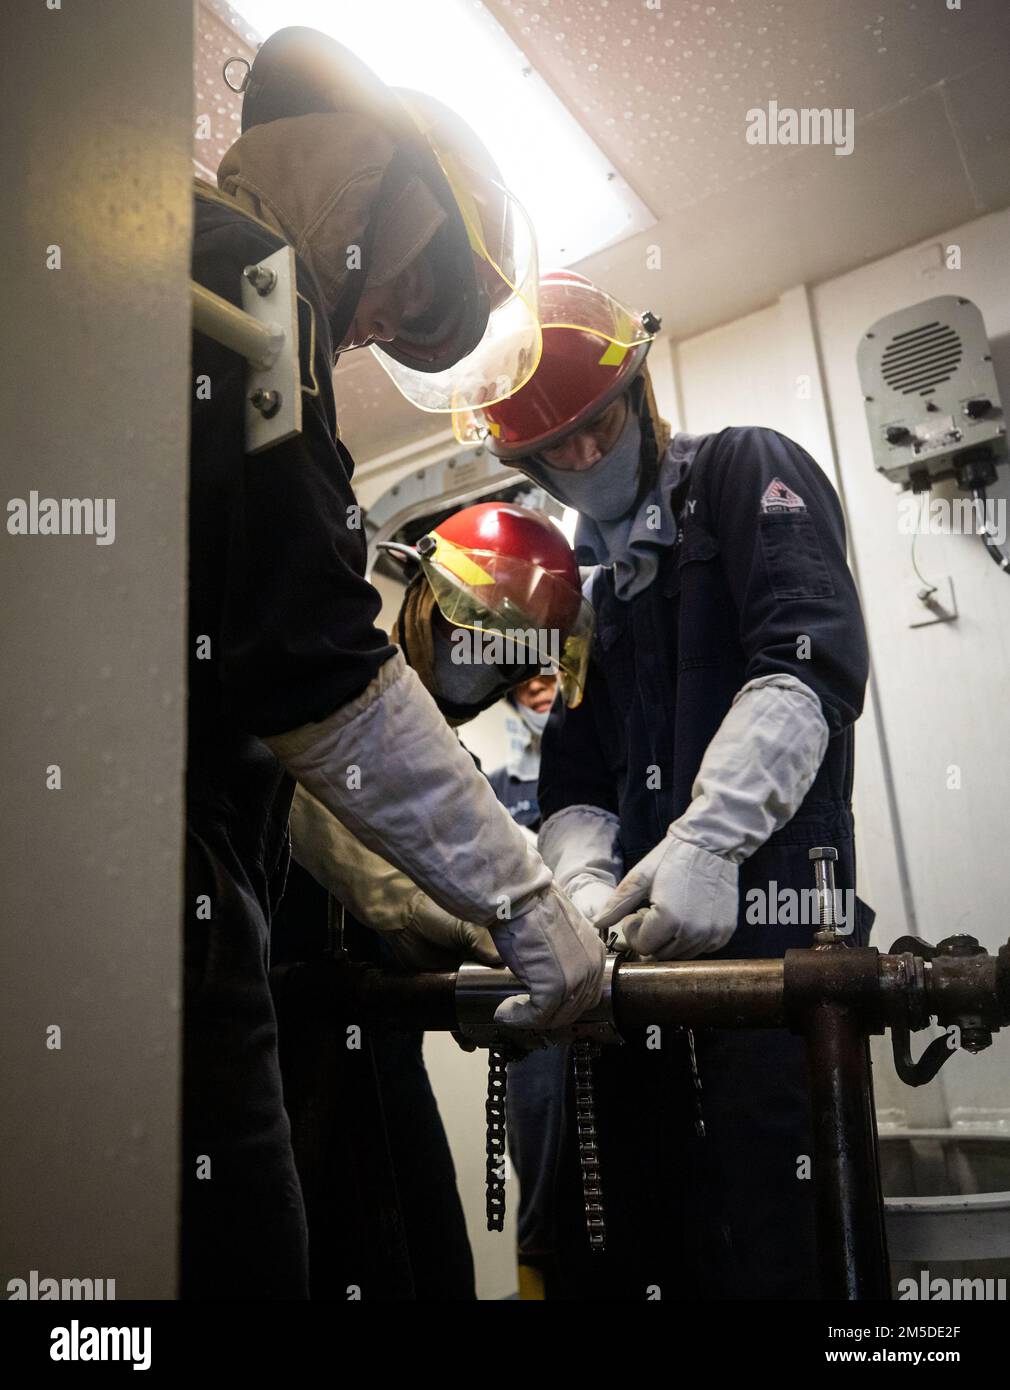 220304-N-LI768-1010  PHILIPPINE SEA (March 4, 2022) – Sailors apply a jubilee patch to a ruptured pipe during damage control training aboard the Independence-variant littoral combat ship USS Tulsa (LCS 16). Tulsa, part of Destroyer Squadron (DESRON) 7, is on a rotational deployment, operating in the U.S. 7th Fleet area of operations to enhance interoperability with partners and serve as a ready-response force in support of a free and open Indo-Pacific region. Stock Photo